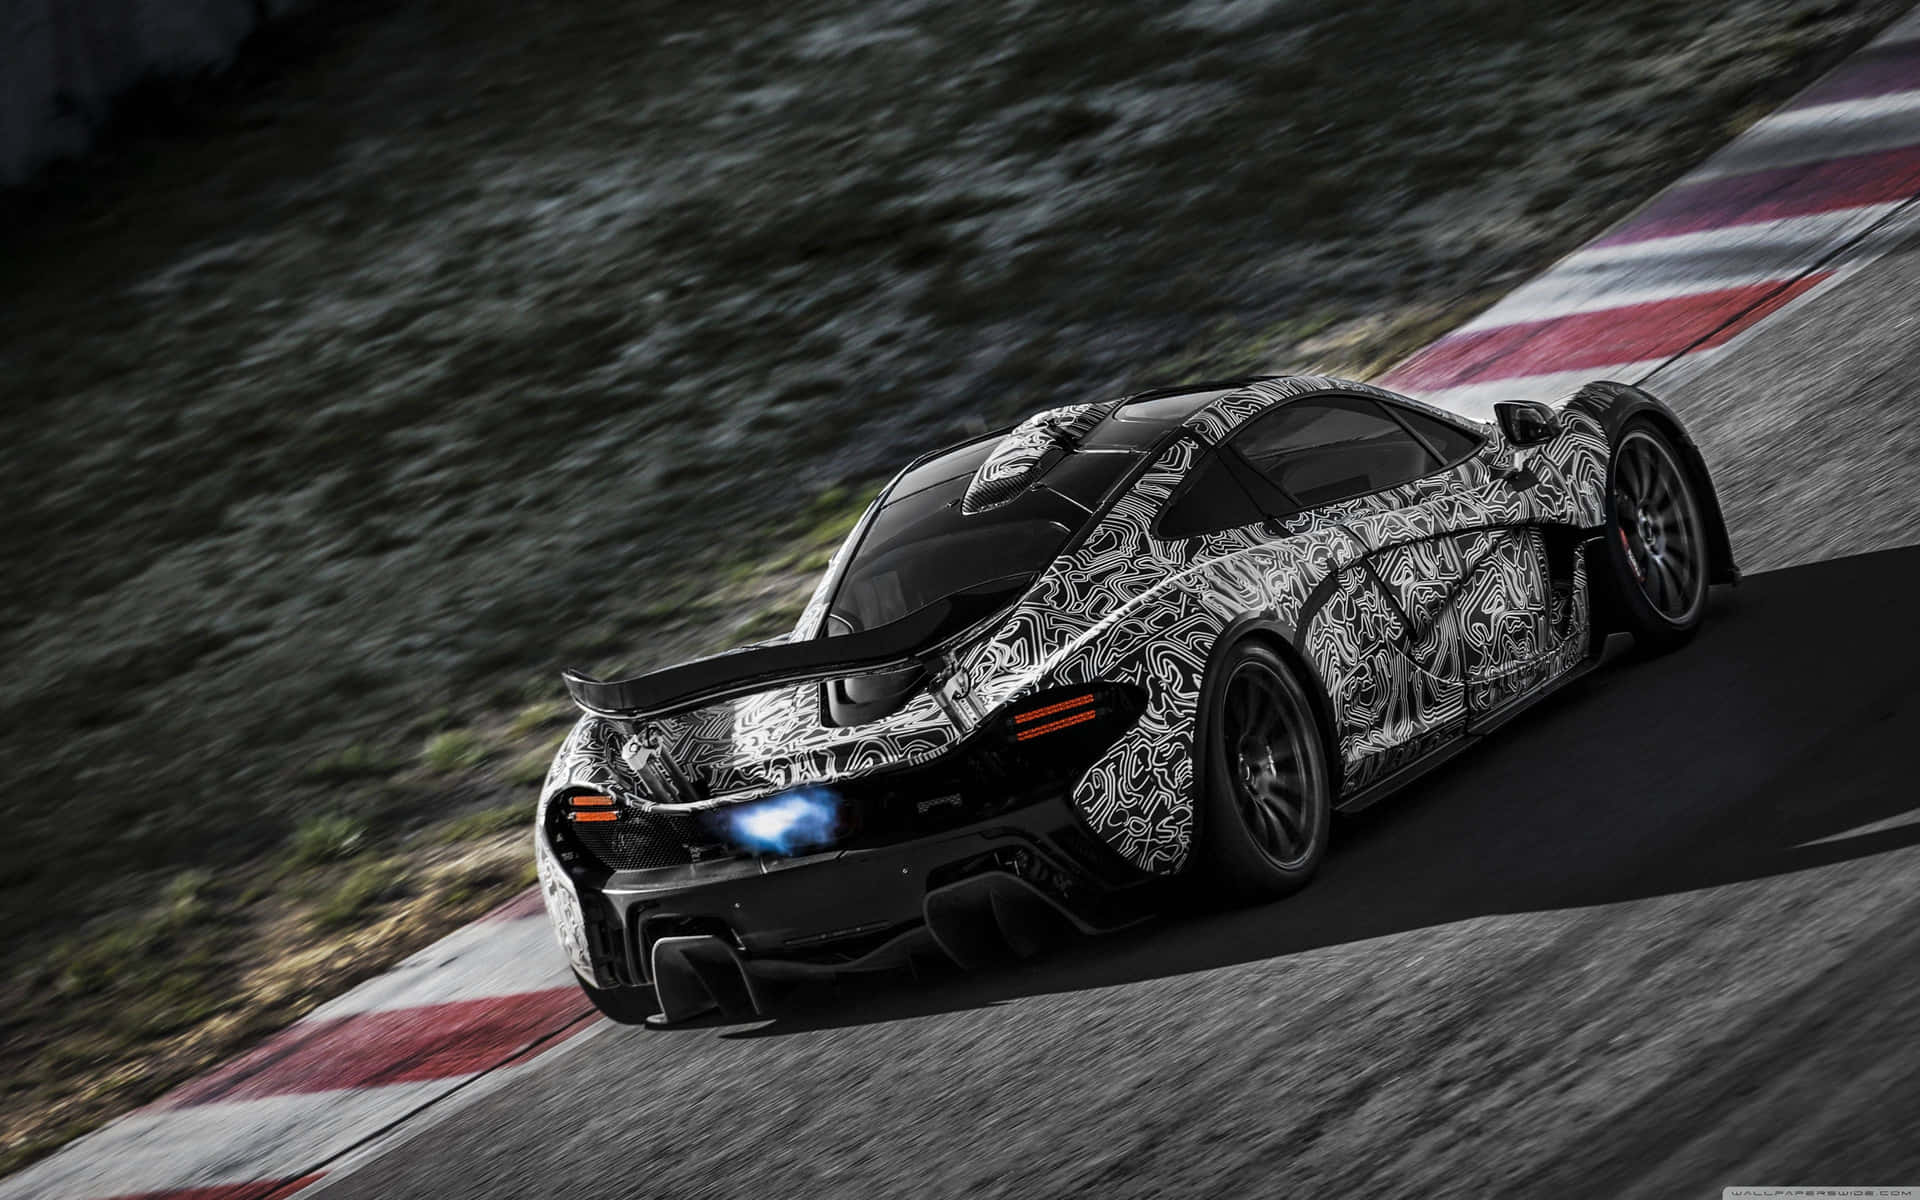 Feel the power and speed of a Cool Mclaren Wallpaper